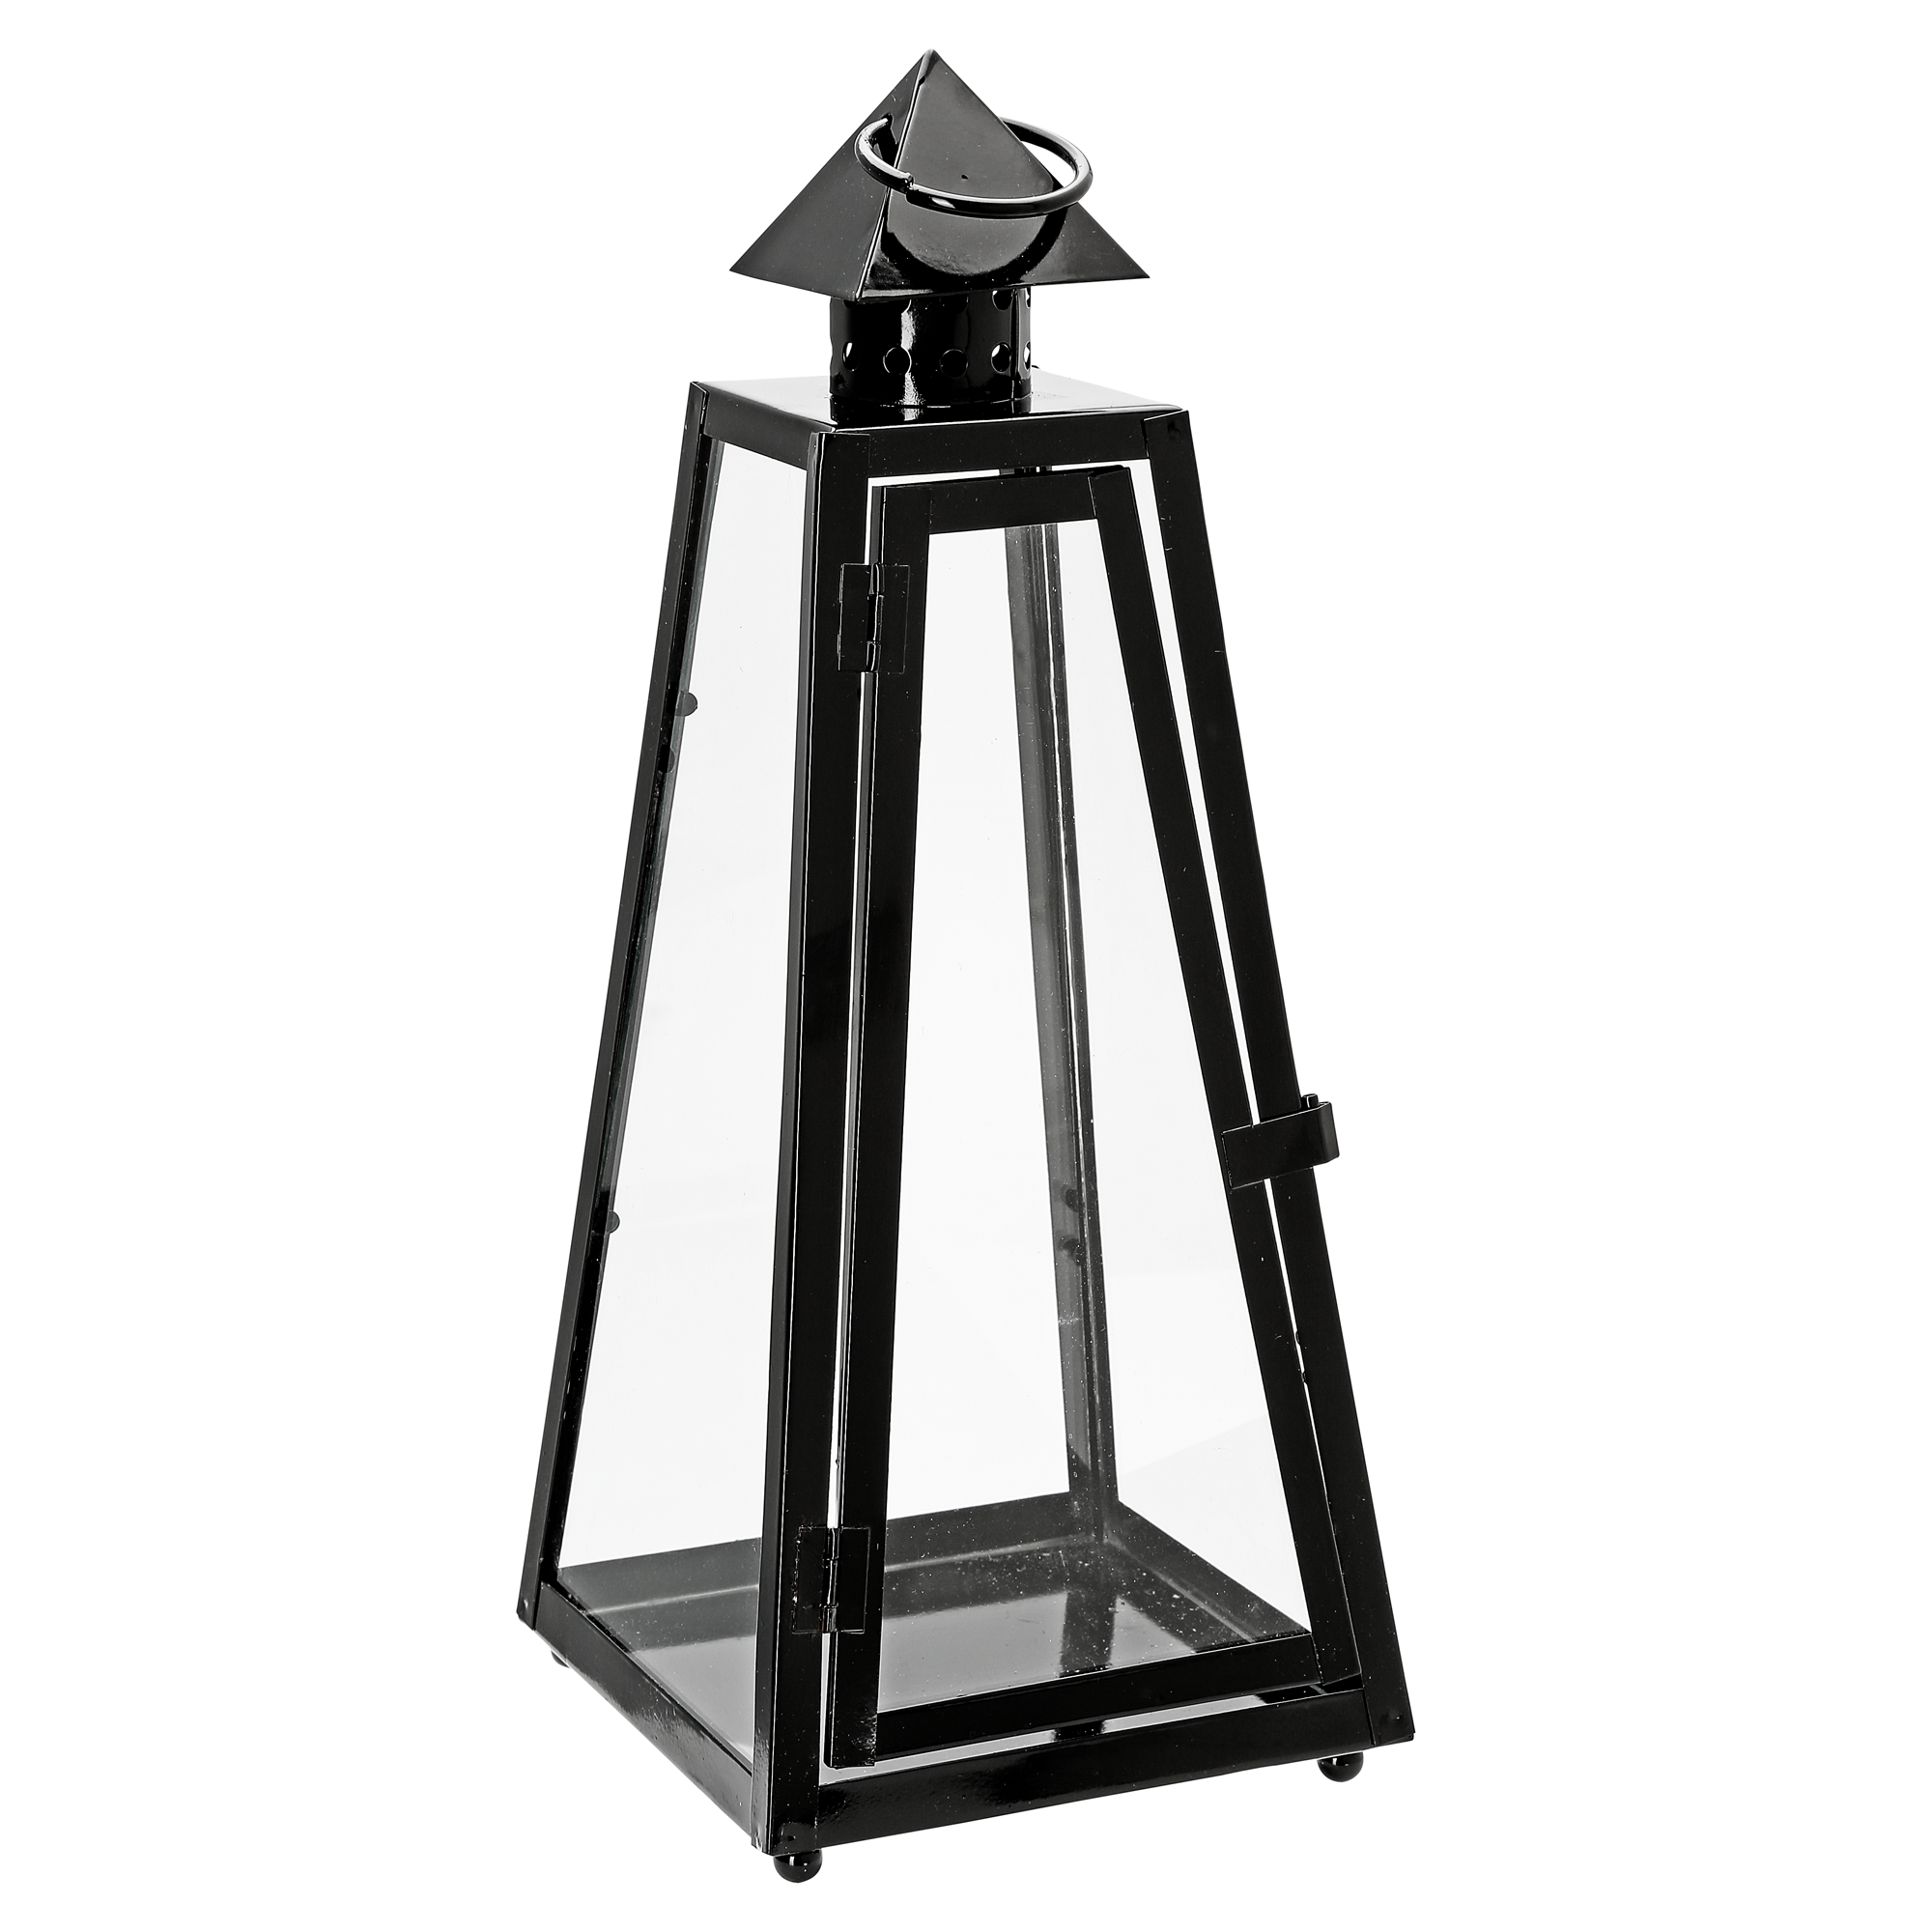 Laterne 'Pyramide' Metall schwarz 40 x 16,5 x 16,5 cm + product picture